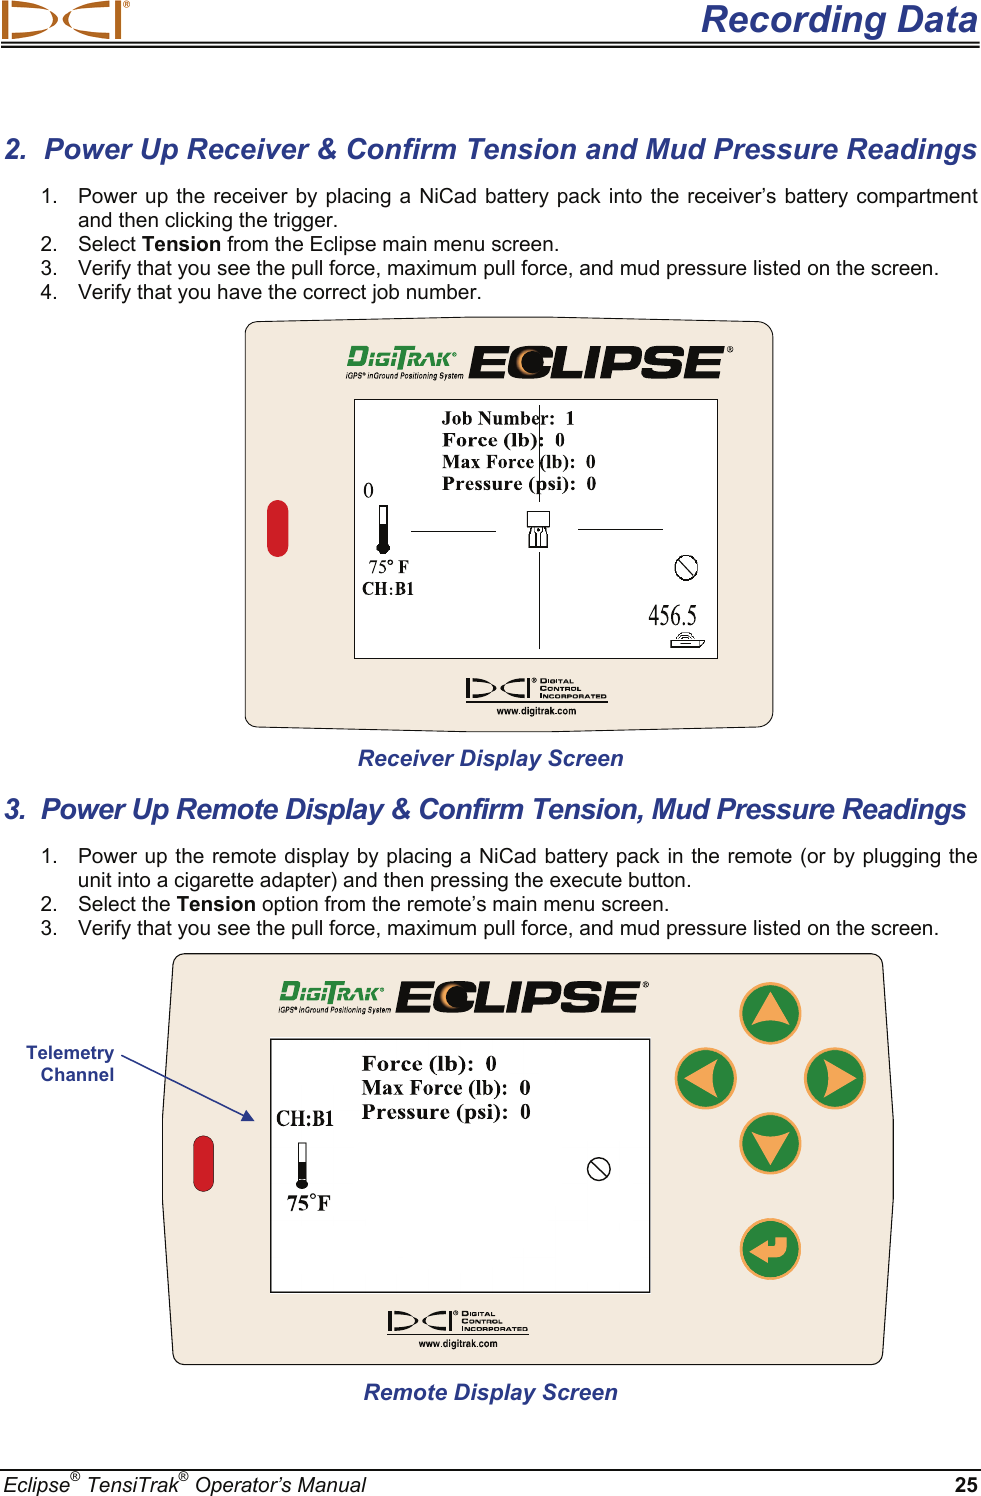  Recording Data Eclipse® TensiTrak® Operator’s Manual 25 2.  Power Up Receiver &amp; Confirm Tension and Mud Pressure Readings 1.  Power up the receiver by placing a NiCad battery pack into the receiver’s battery compartment and then clicking the trigger. 2. Select Tension from the Eclipse main menu screen. 3.  Verify that you see the pull force, maximum pull force, and mud pressure listed on the screen. 4.  Verify that you have the correct job number.    Receiver Display Screen 3.  Power Up Remote Display &amp; Confirm Tension, Mud Pressure Readings 1.  Power up the remote display by placing a NiCad battery pack in the remote (or by plugging the unit into a cigarette adapter) and then pressing the execute button. 2. Select the Tension option from the remote’s main menu screen. 3.  Verify that you see the pull force, maximum pull force, and mud pressure listed on the screen.                Remote Display Screen Telemetry Channel 